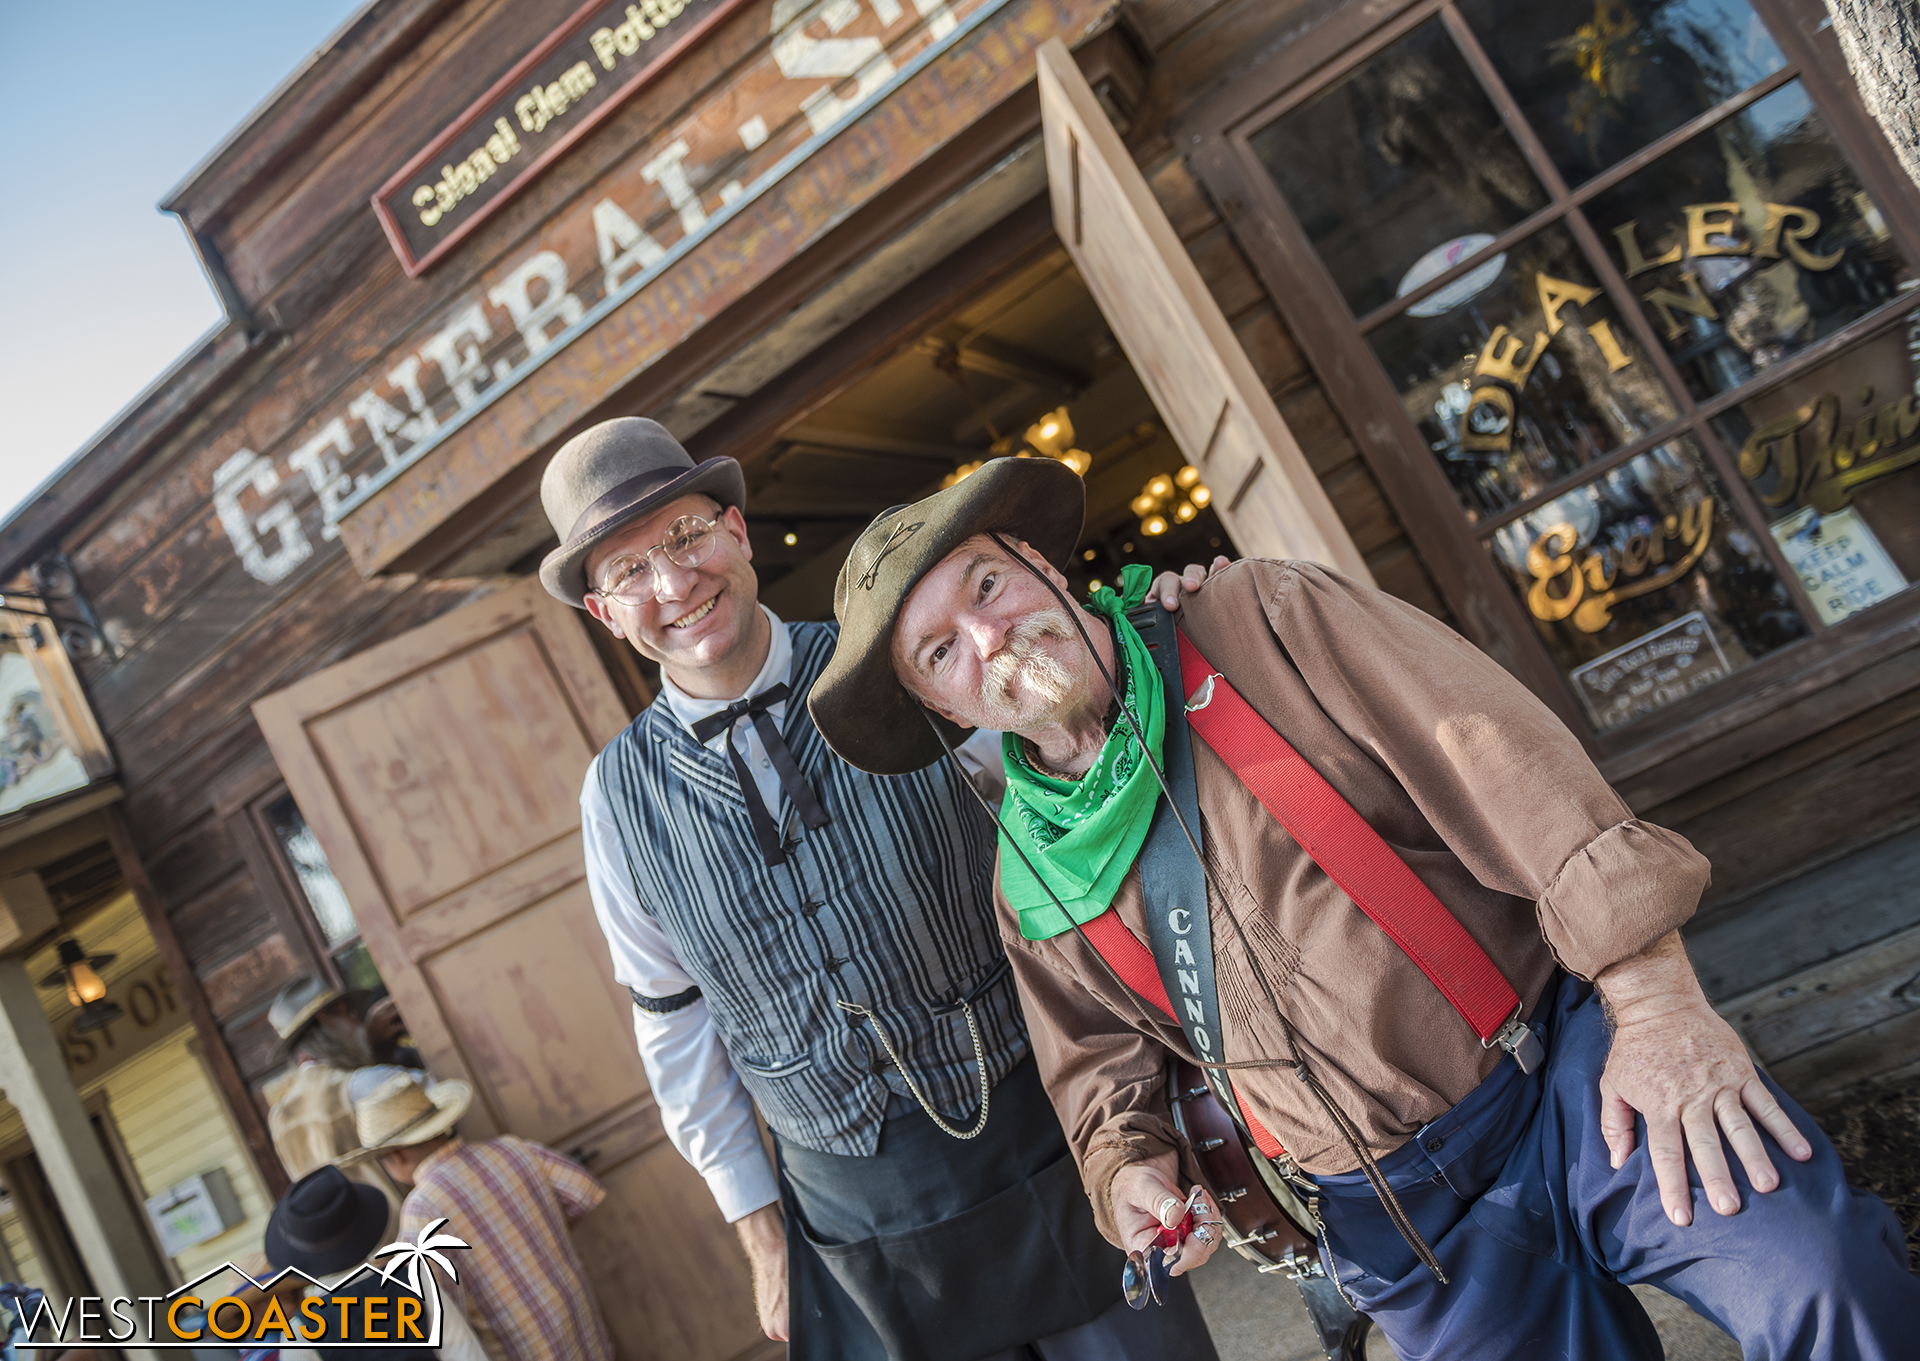  Colonel Clem Potter, purveyor of the General Store, and Calico musician “Cannonball” pose in front of said General Store. 